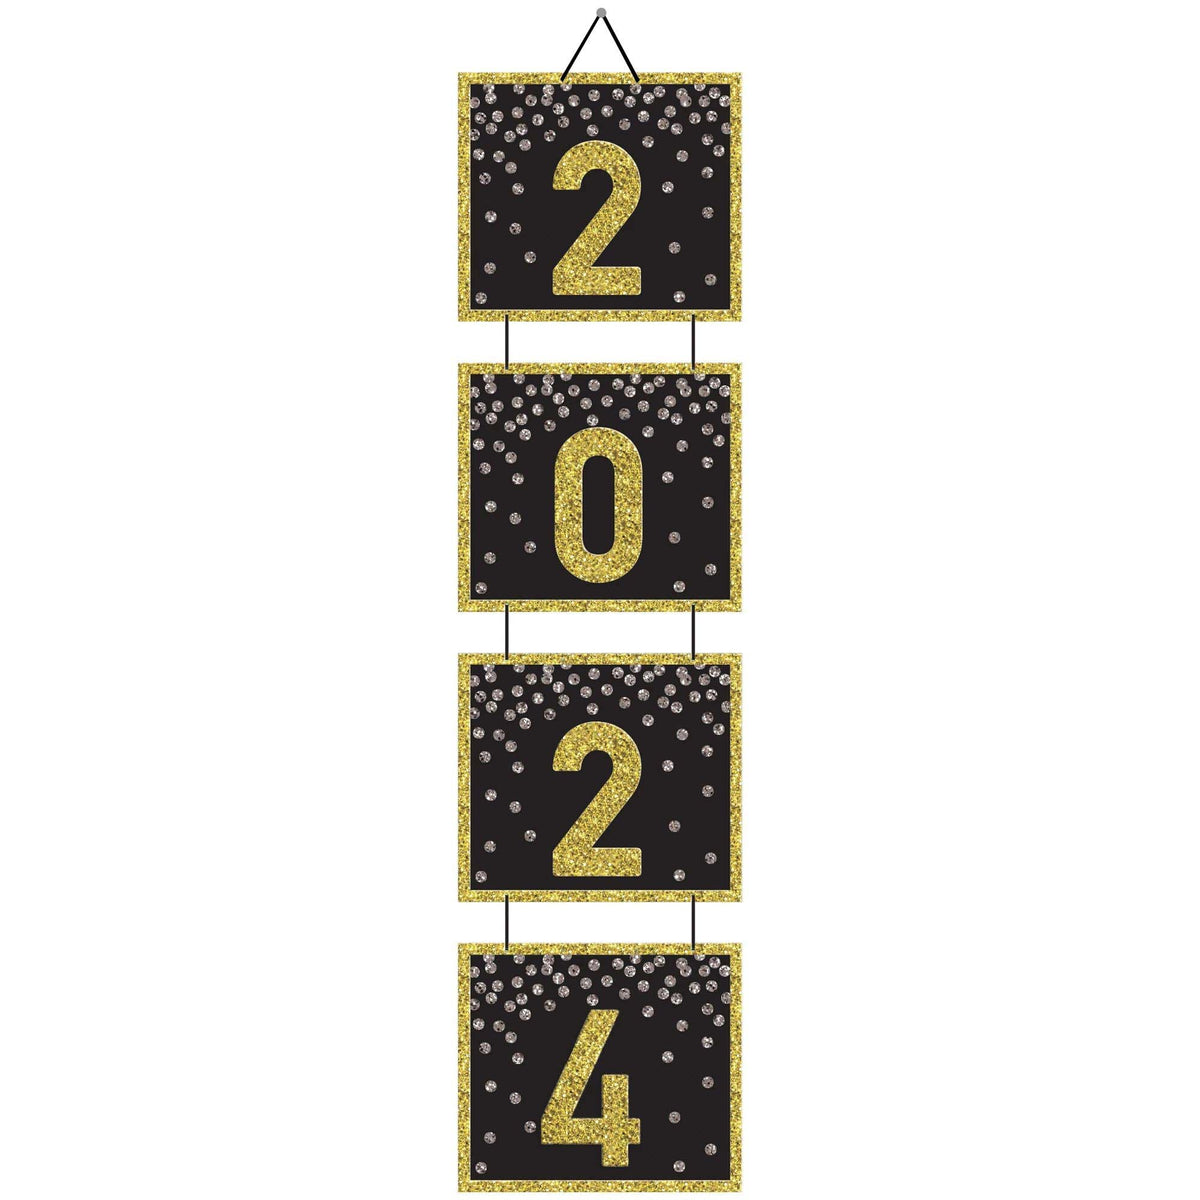 AMSCAN CA New Year 2024 New Year Jumbo Hanging Decoration, 60 x 15 Inches, 1 Count